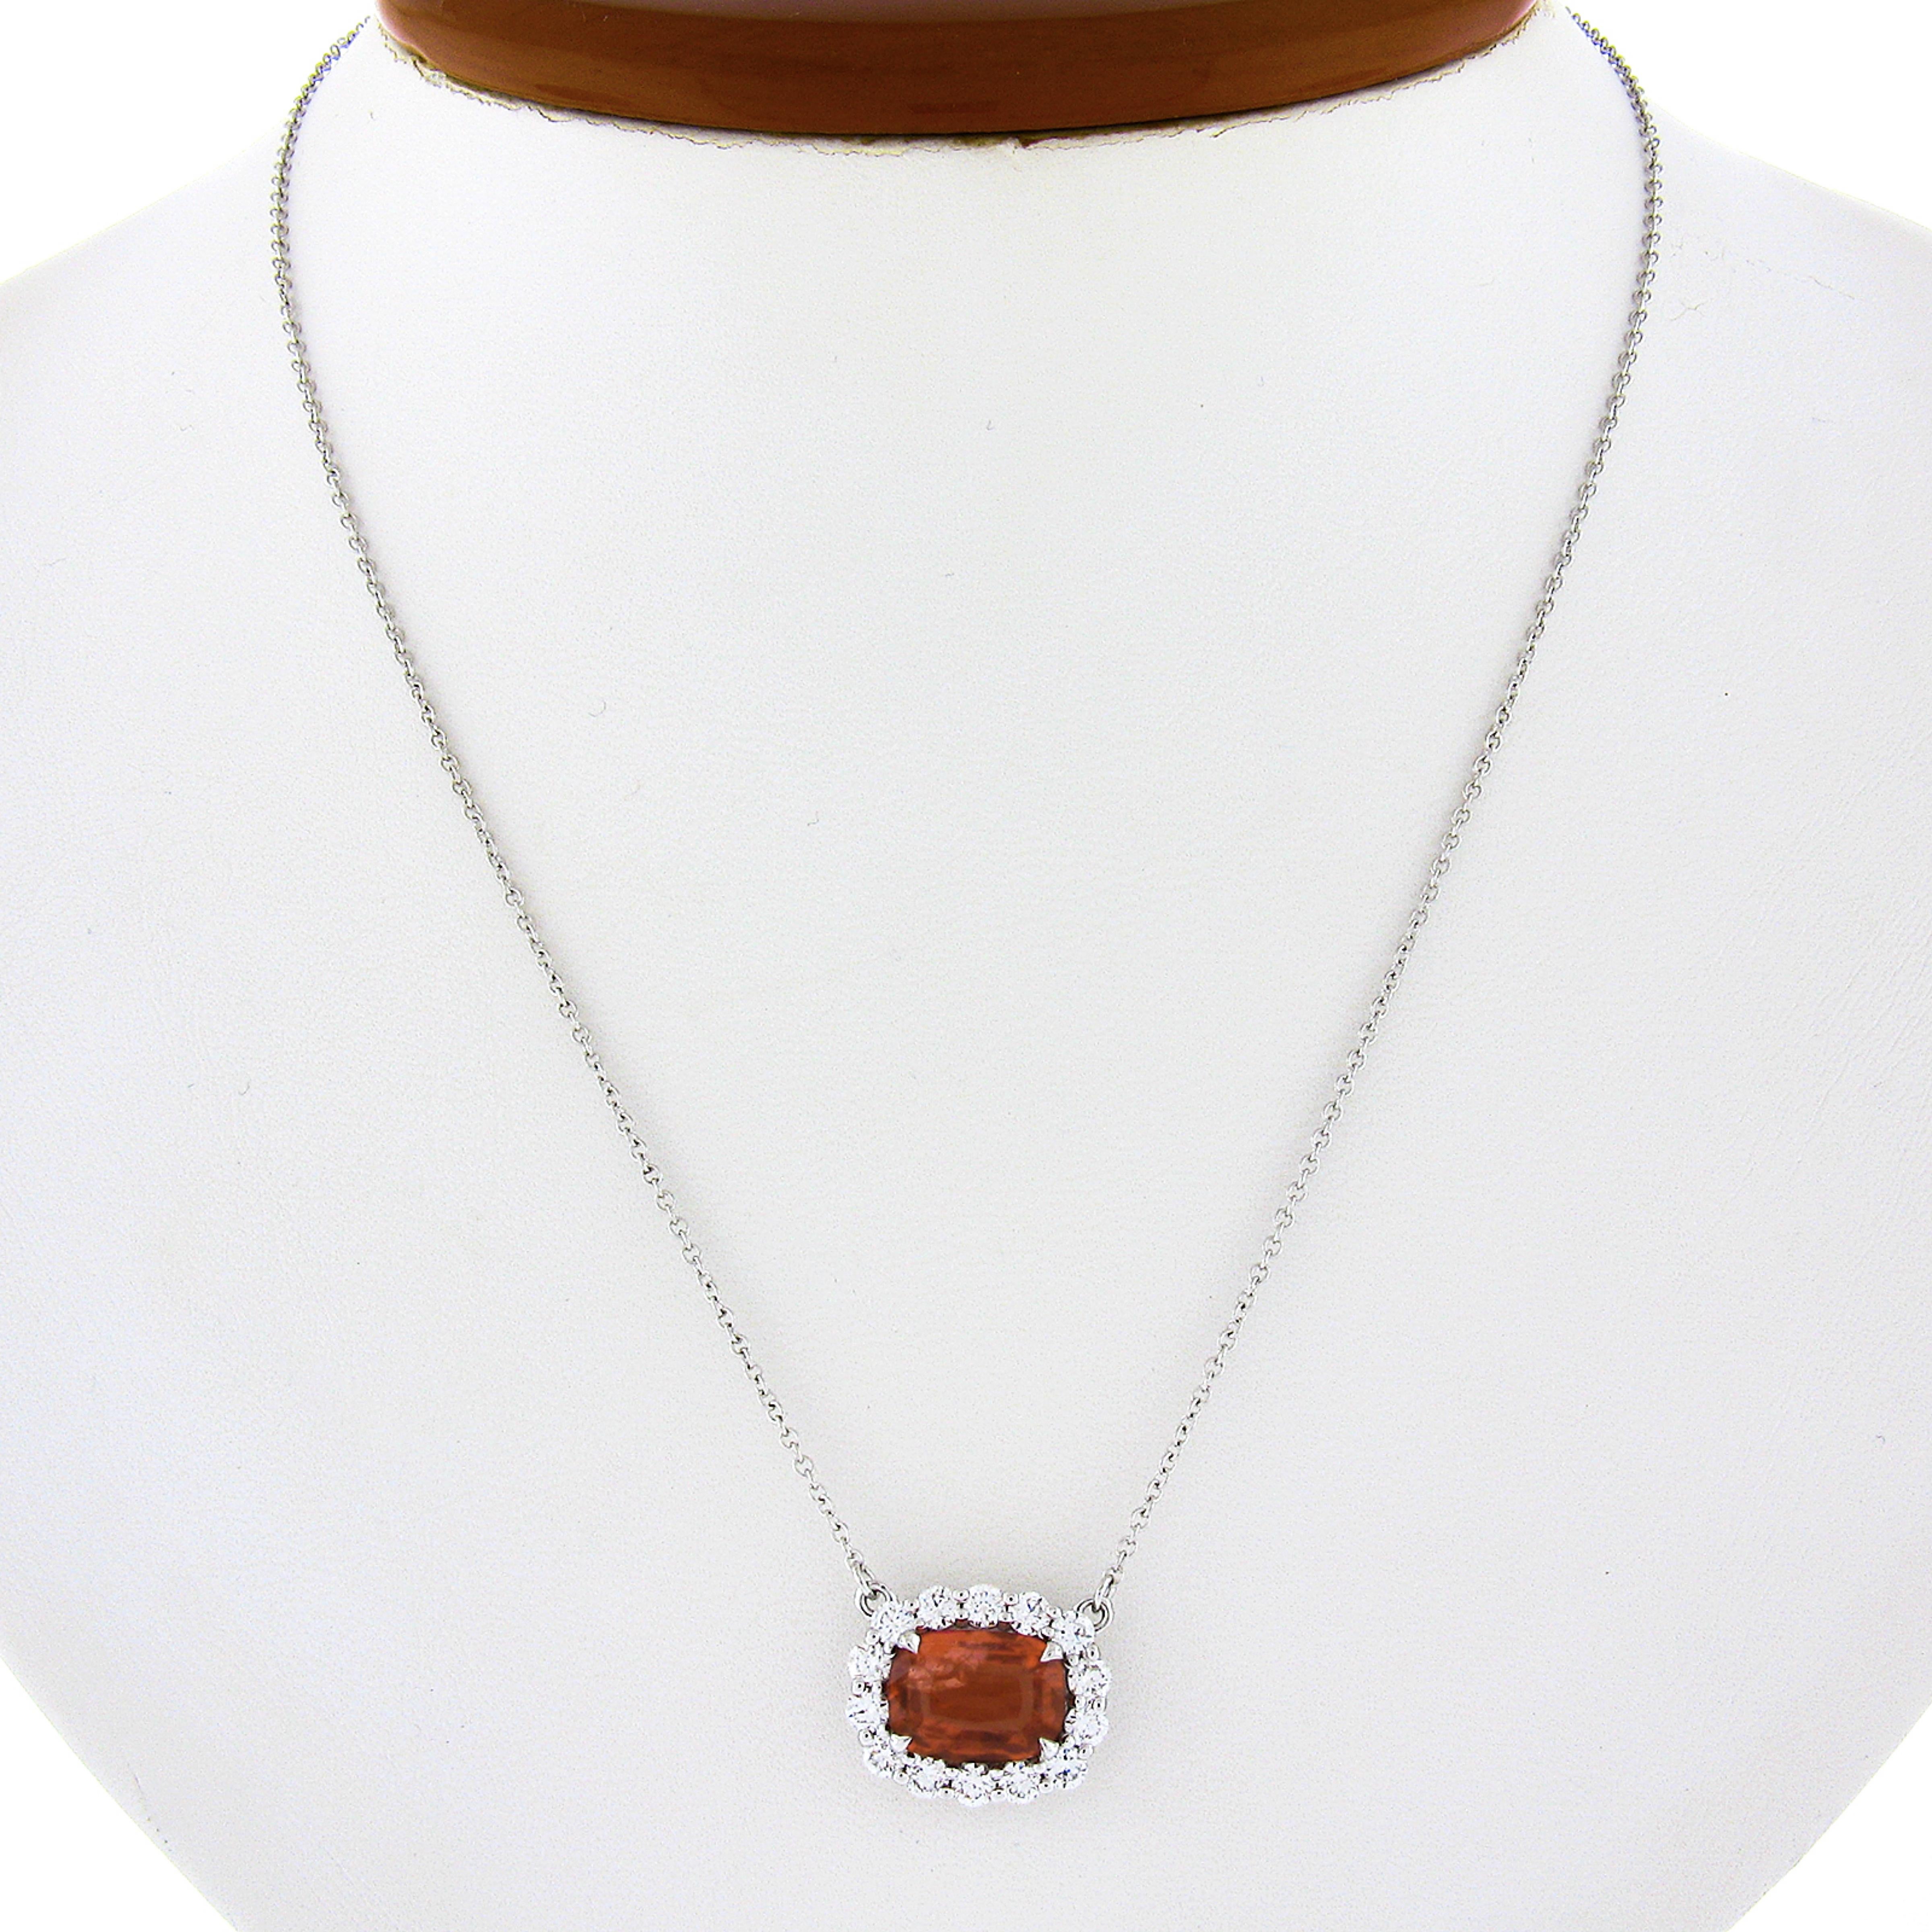 Here we have a gorgeous, brand new and custom made pendant necklace crafted in solid 18k white gold and features a very fine, GIA certified, cushion brilliant cut spinel solitaire neatly prong set at the center in which is further surrounded by a